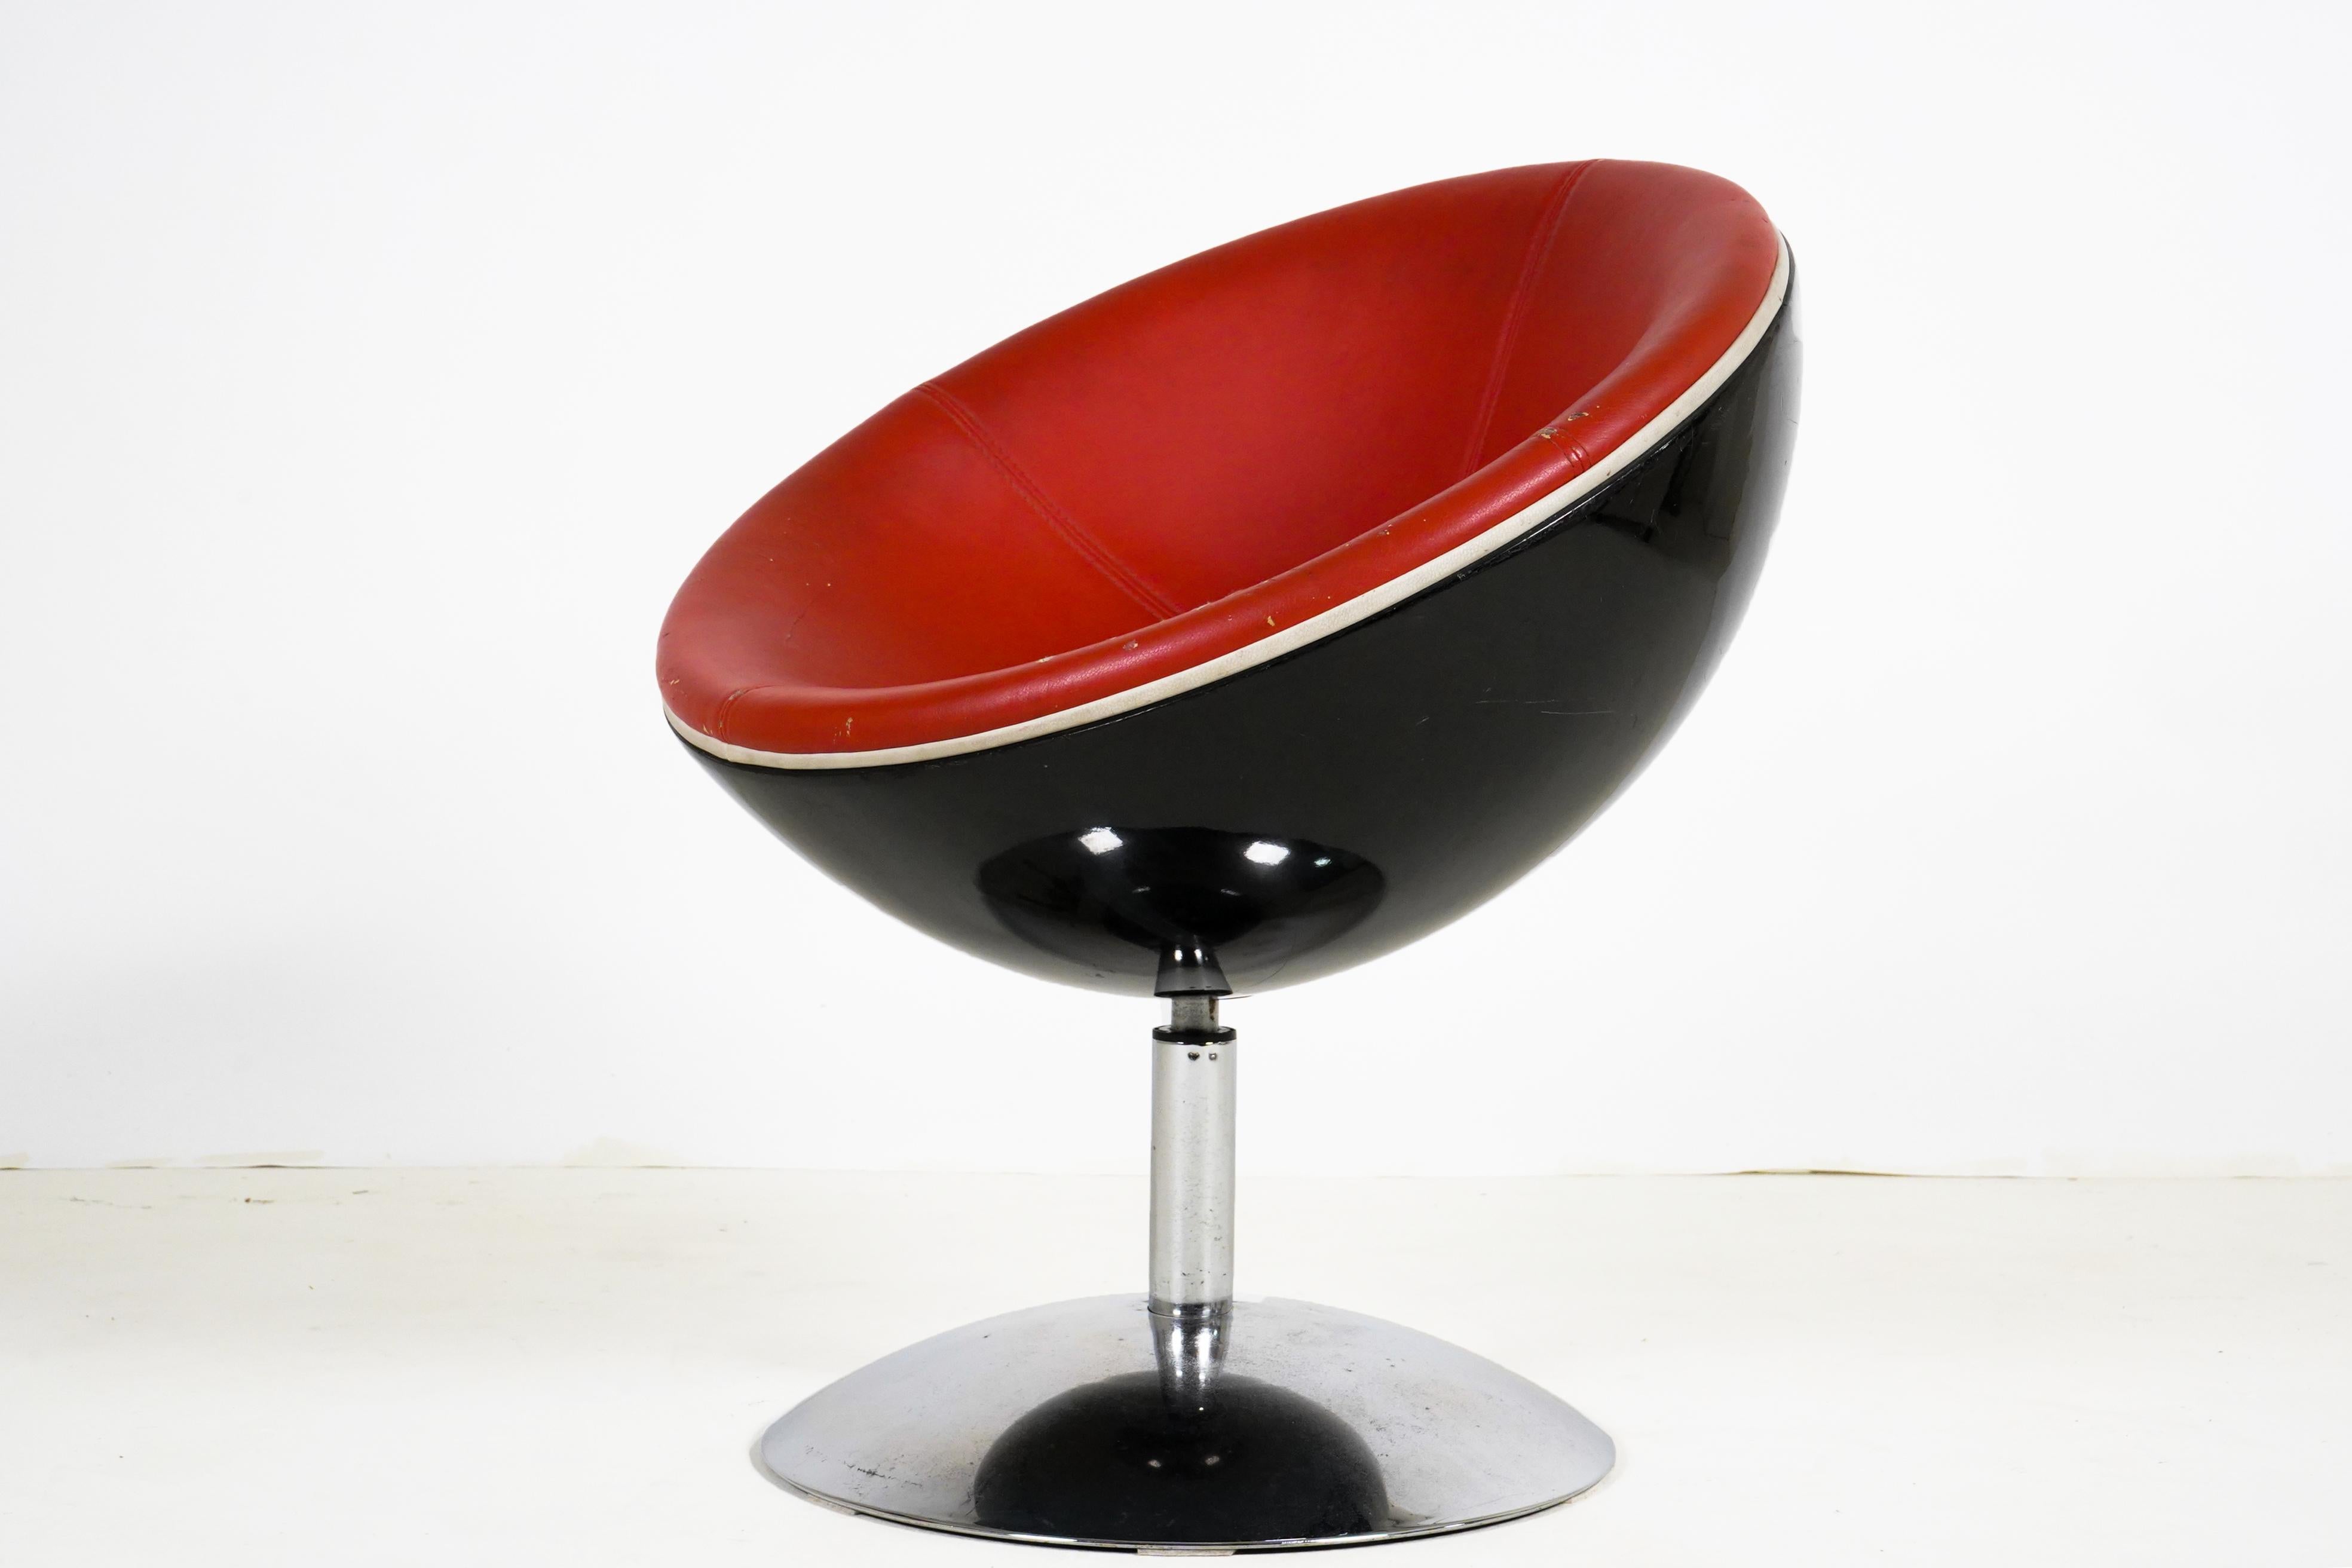 This playful 1970s pod chair swivels on a polished chrome base. The back of the pod is made from resin and the seating surface is soft synthetic leather. The leather is in overall good condition with no tears but there is some abrasion and loss of